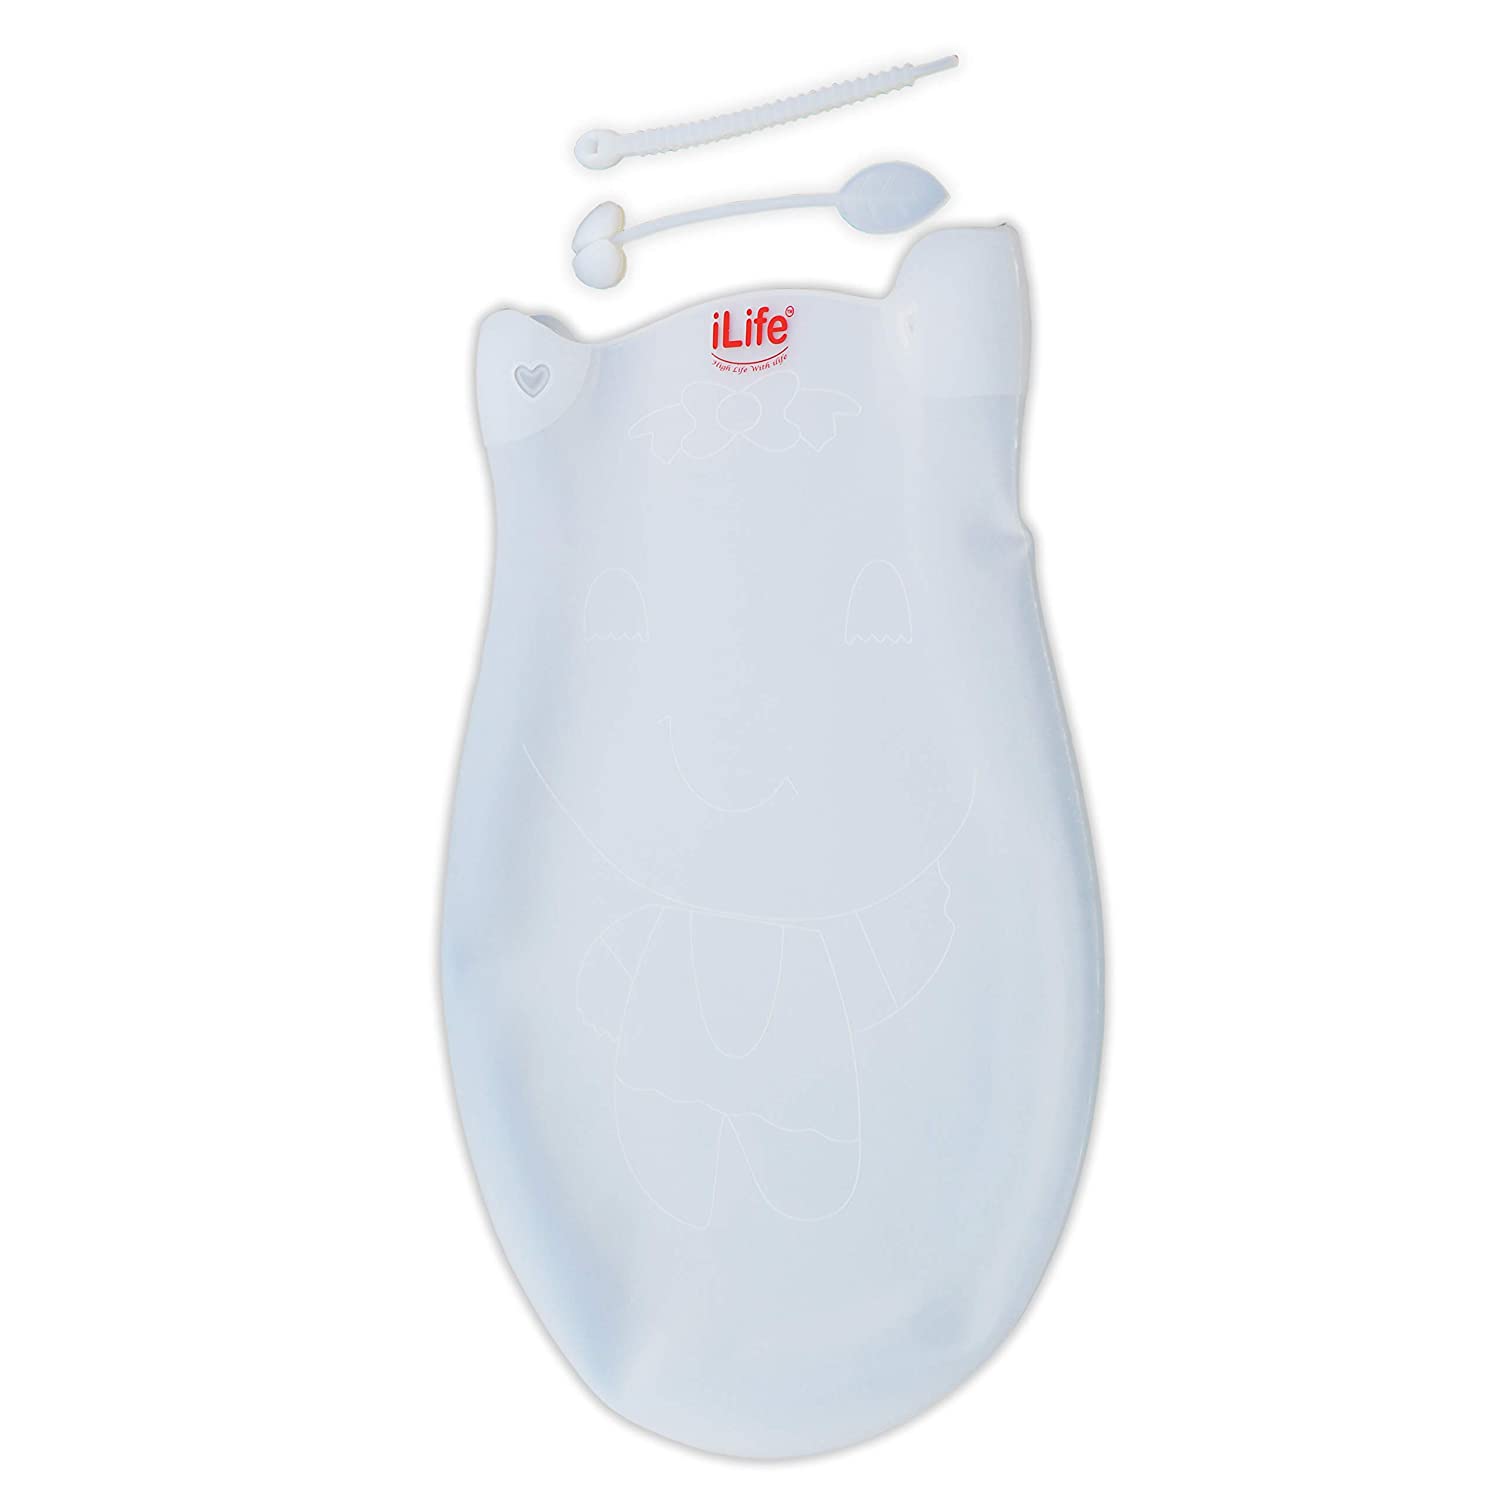 iLife Silicone Preservation Magic Kneading Dough Flour-Mixing Atta Maker Bag for Chapathy,Bread, Pastry, Pizza & Tortilla Mixing Preservation Bag Cooking Tool White